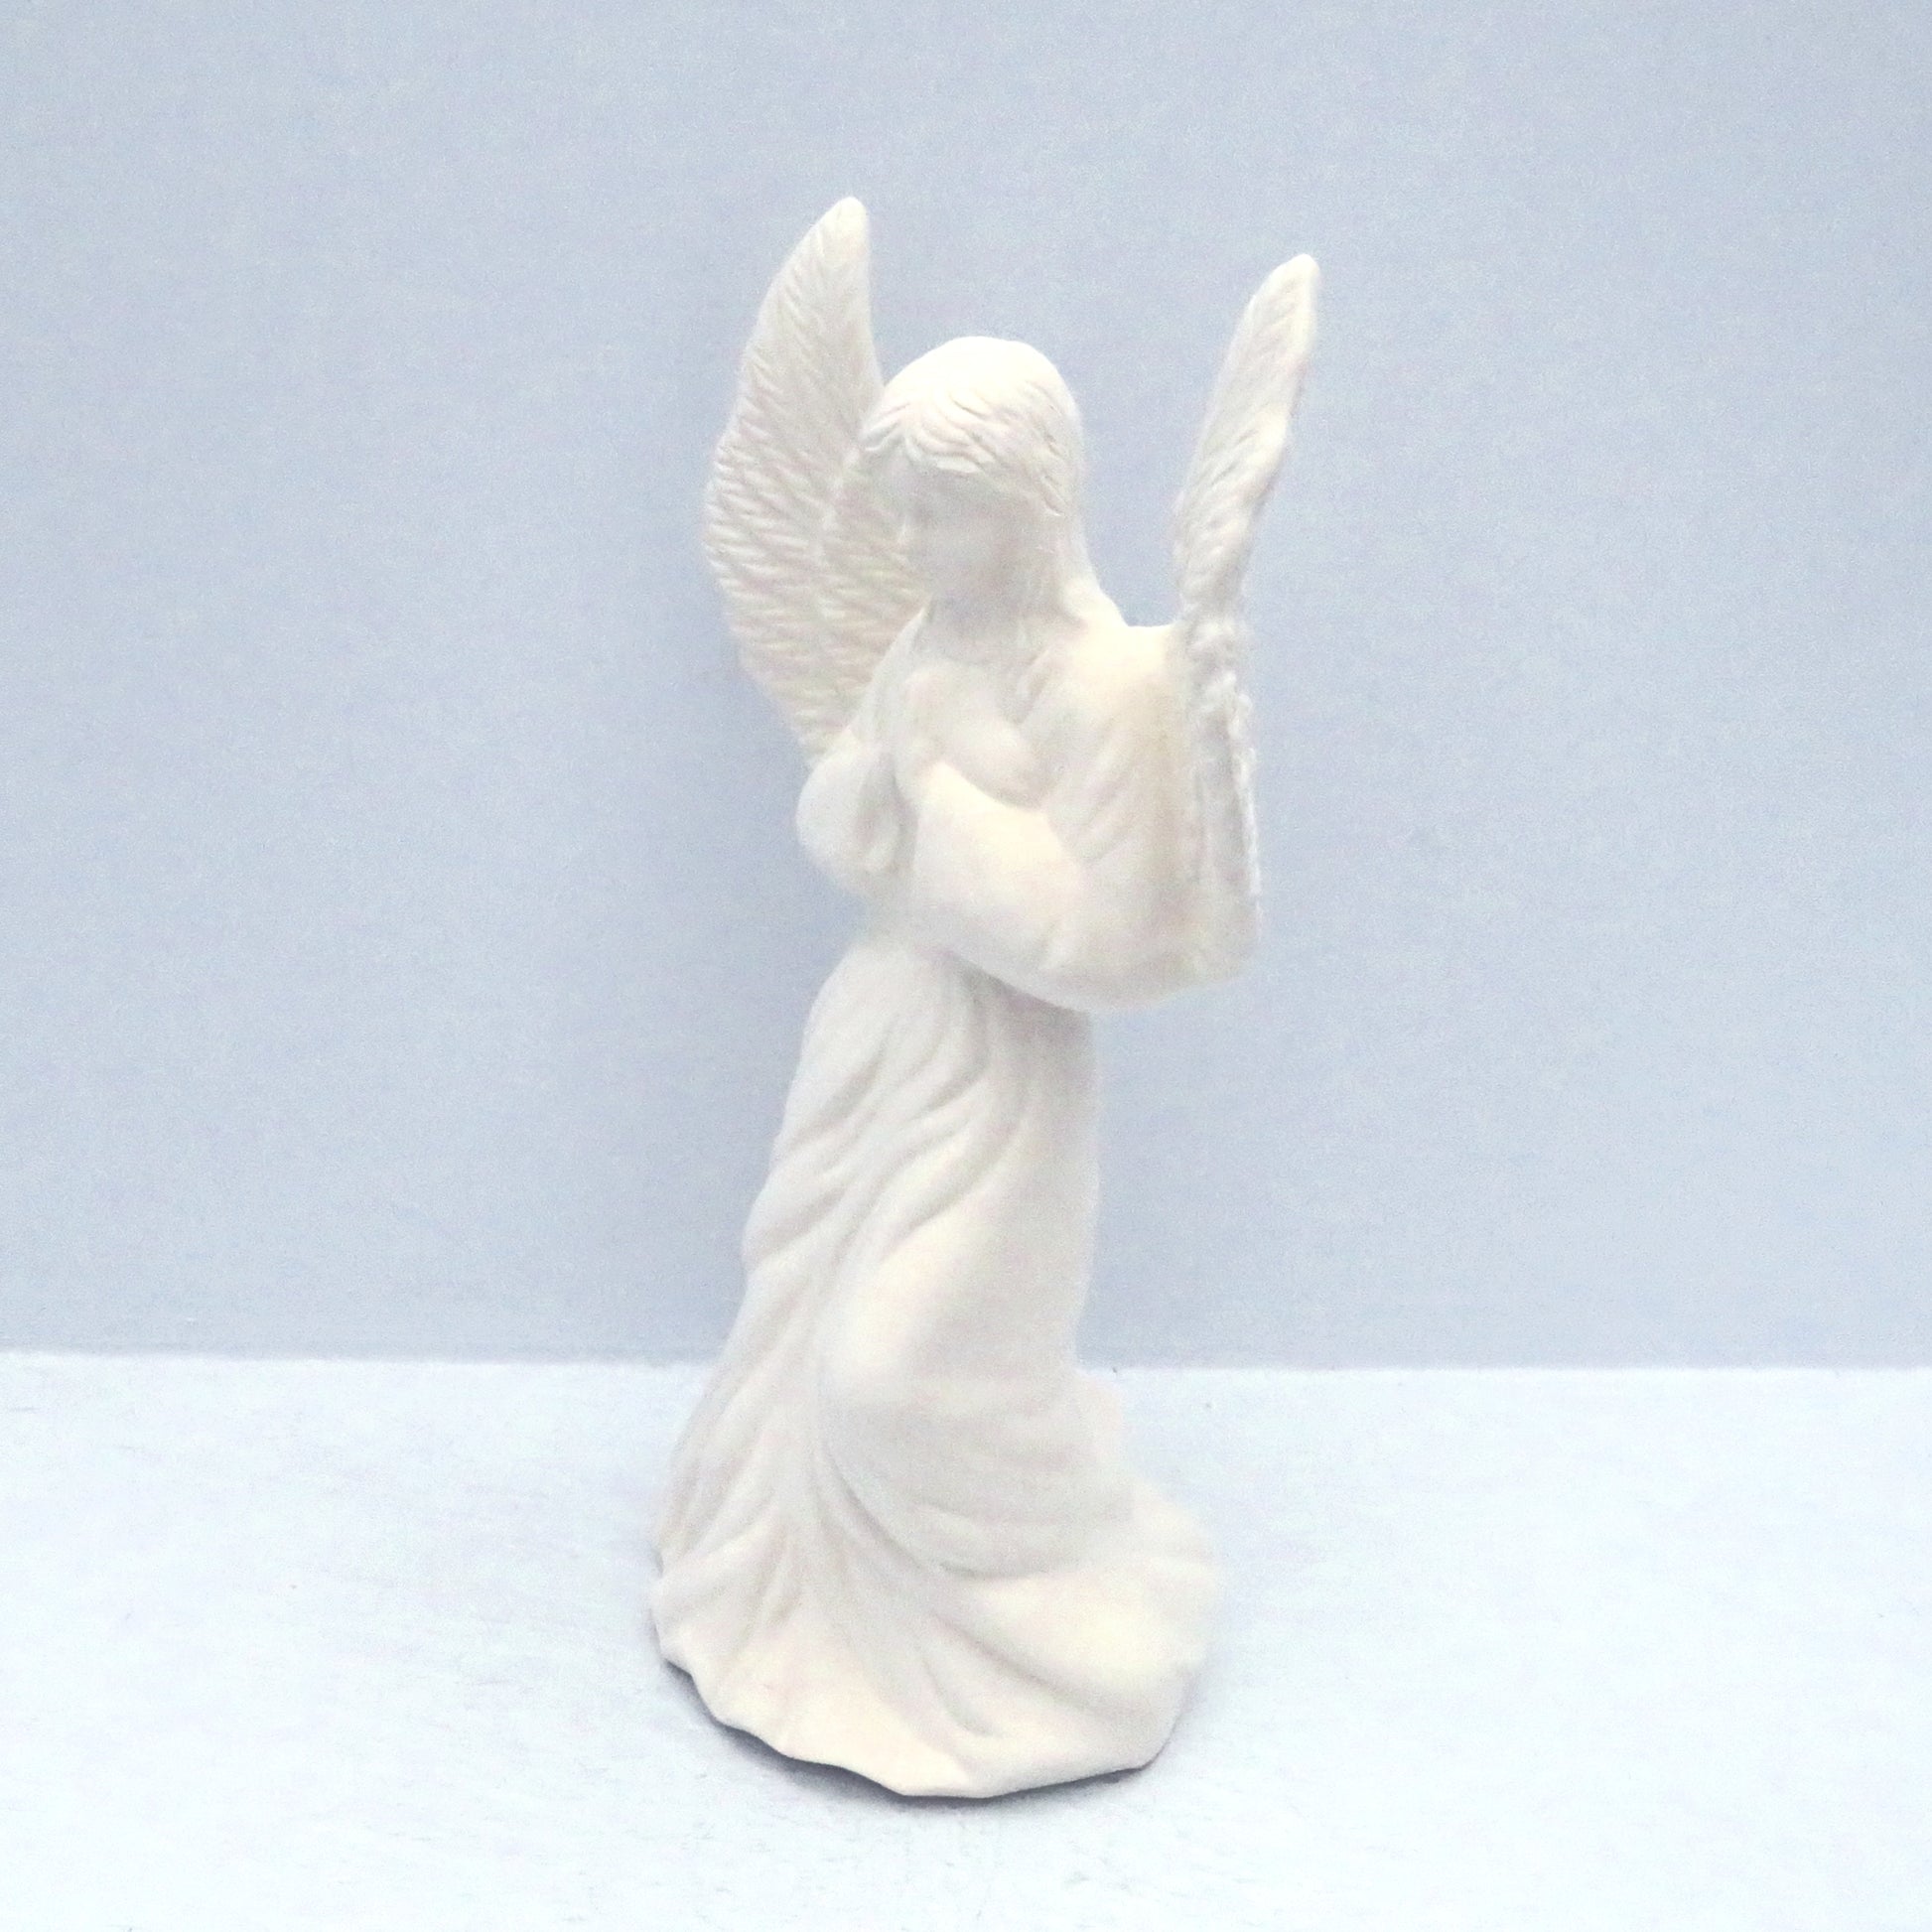 Side view of paintable ceramic angel figuine with wings outstretched and her hands in the prayer position.  She is against a pale blue background.